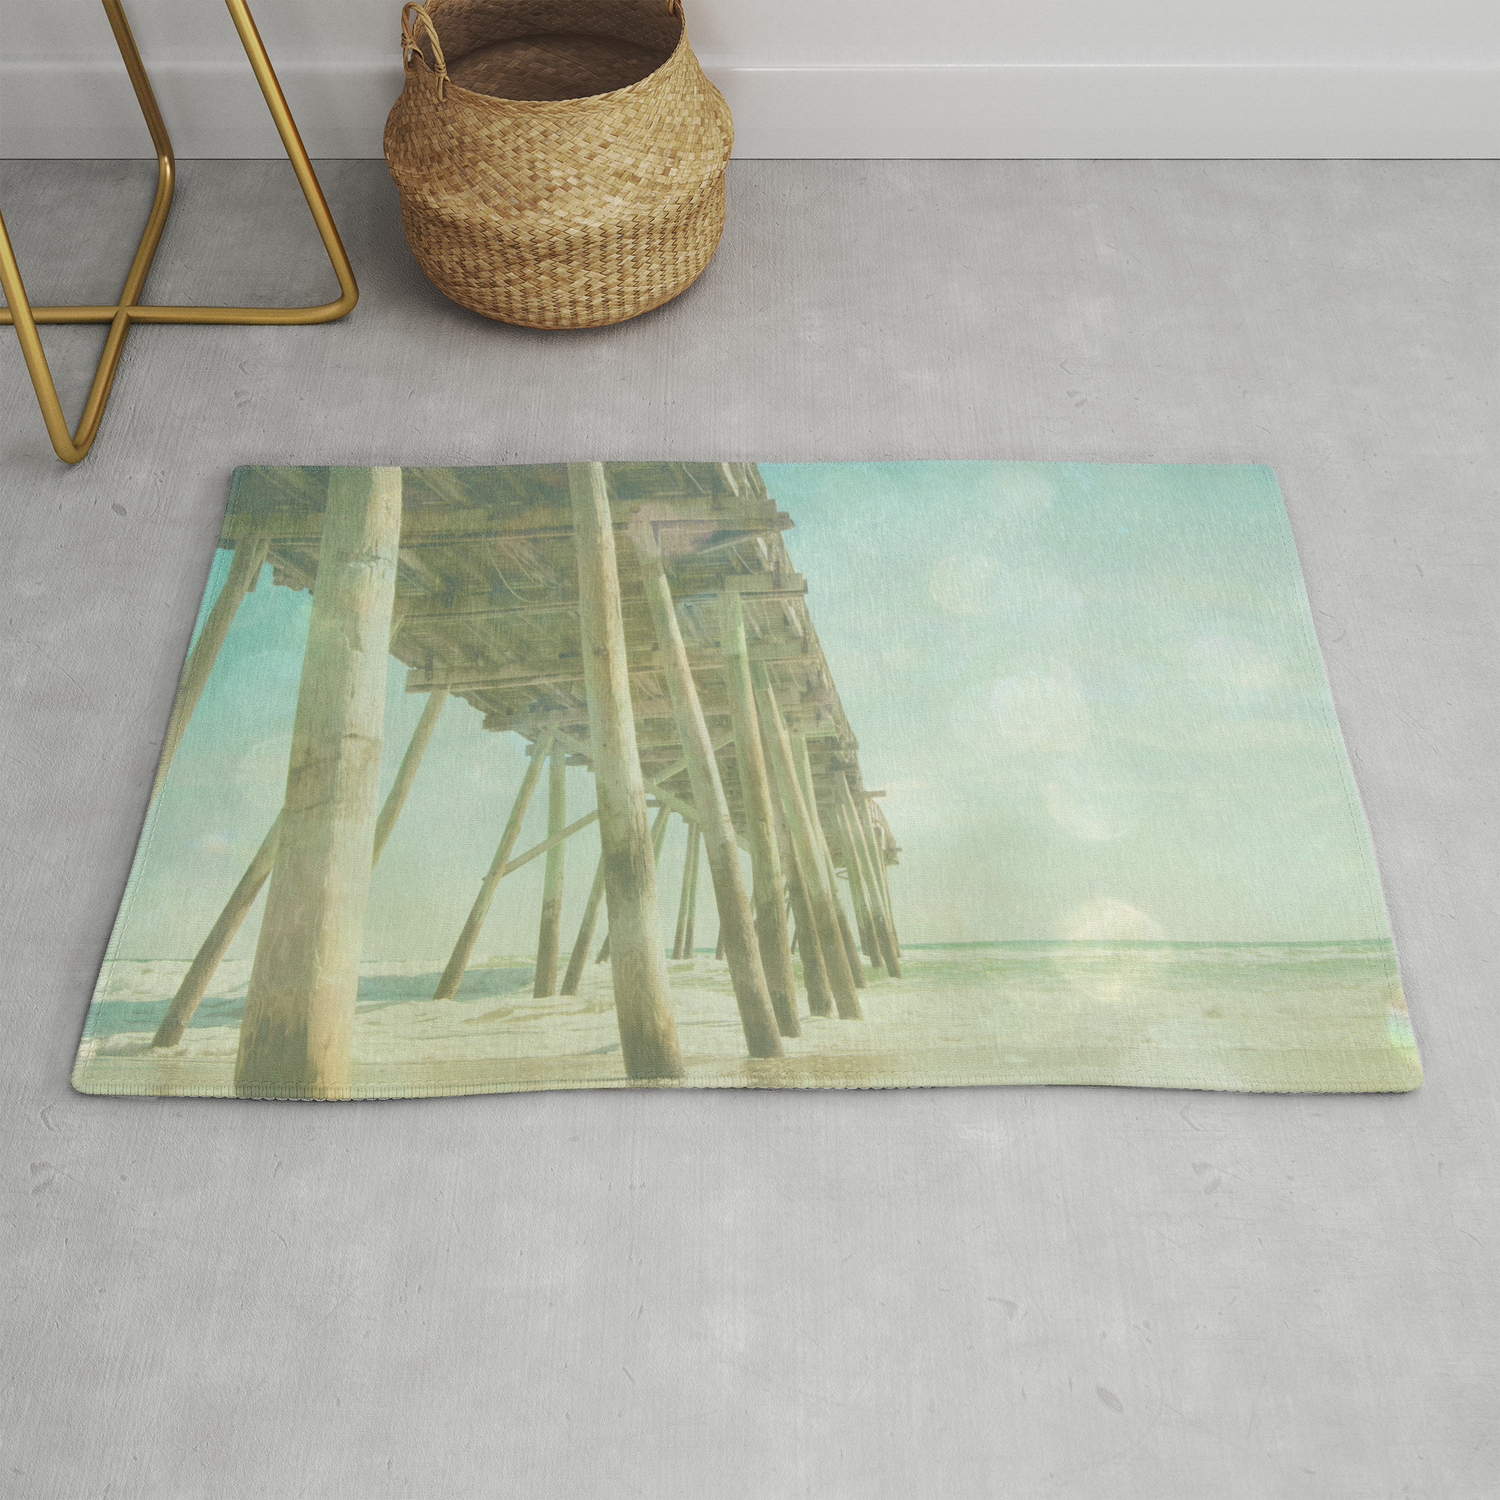 Pier 1 Rug By 1201 Photography Society6, Rugs At Pier One